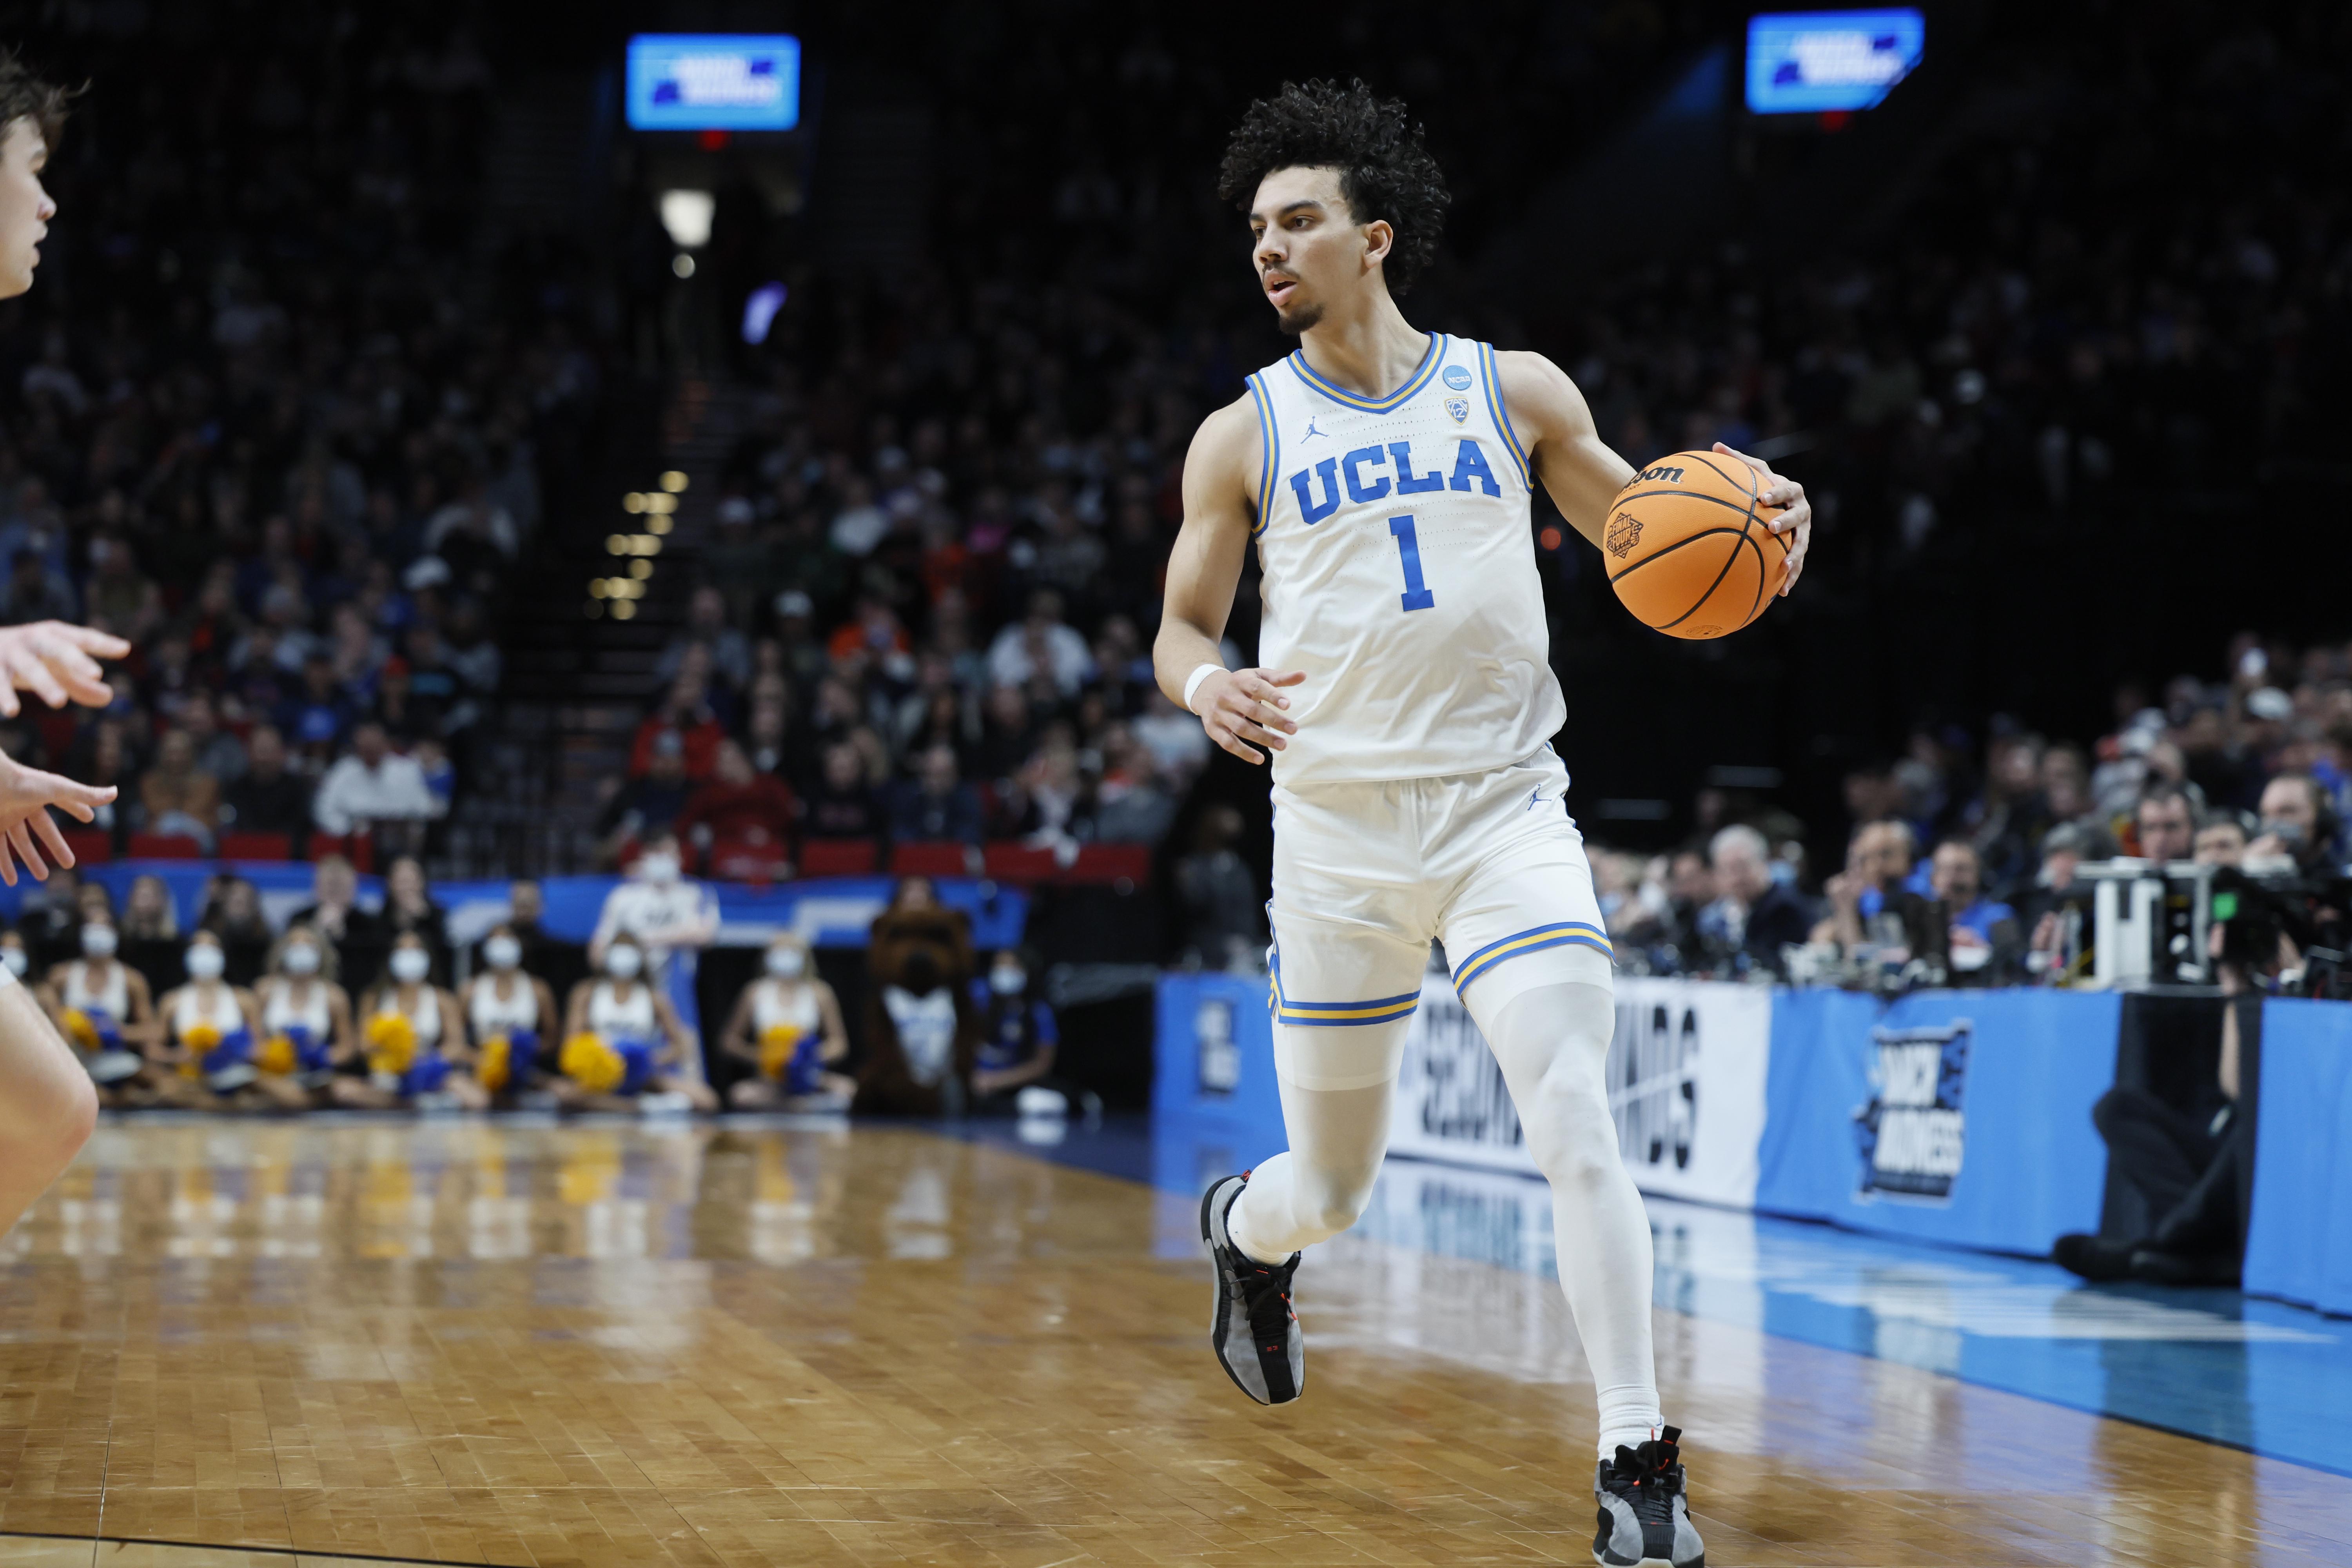 UCLA NCAA Tournament History: National Championships, All-Time Record, Best March Madness Results & More